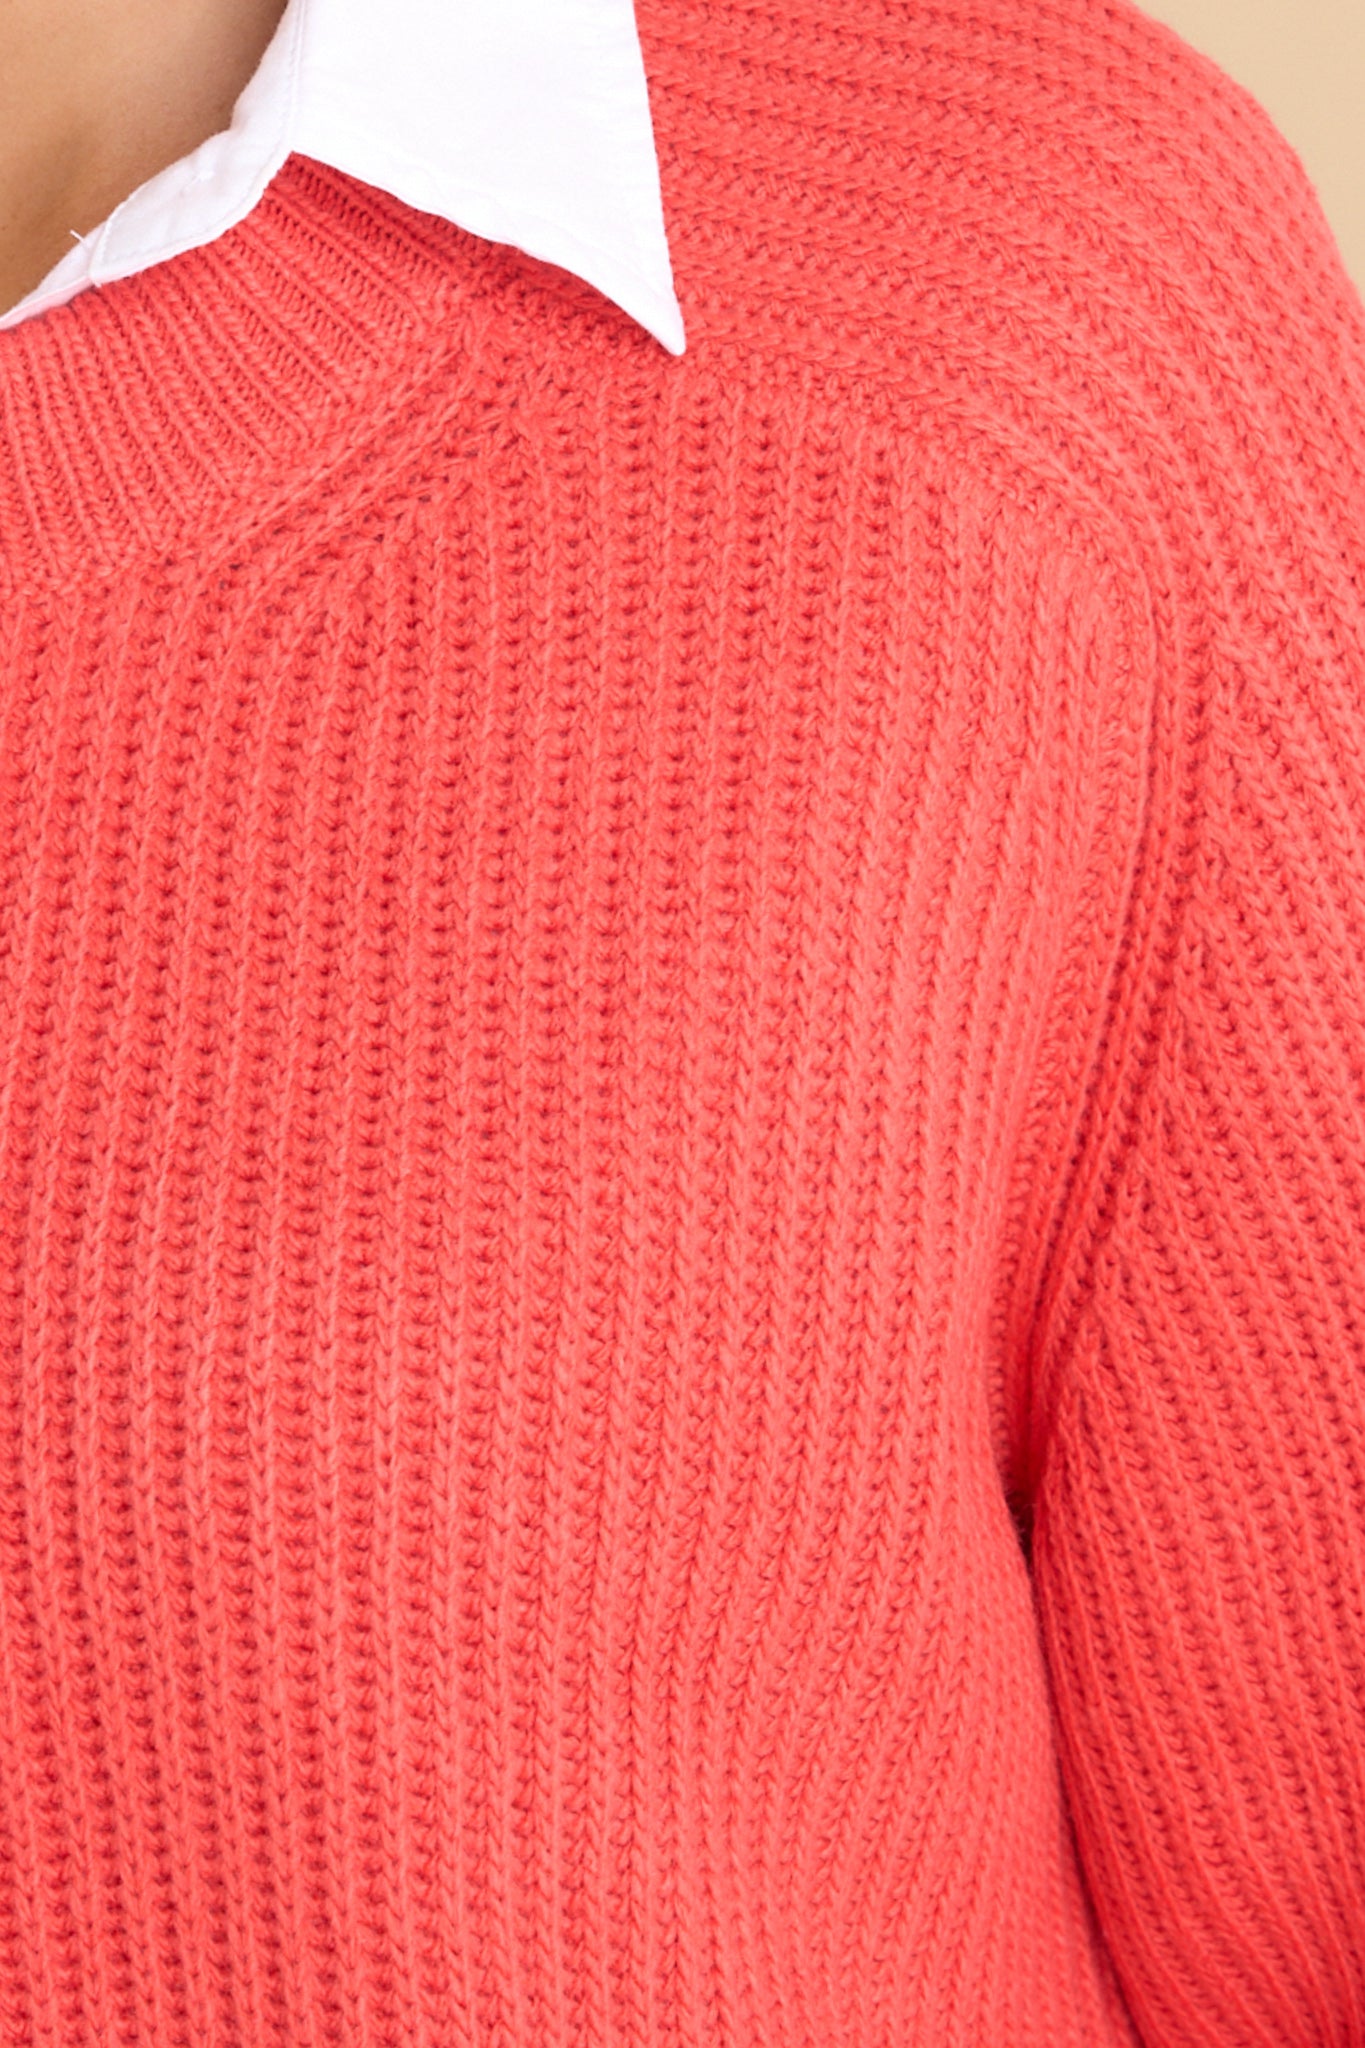 2 Just A Thought Tomato Red Sweater at reddress.com